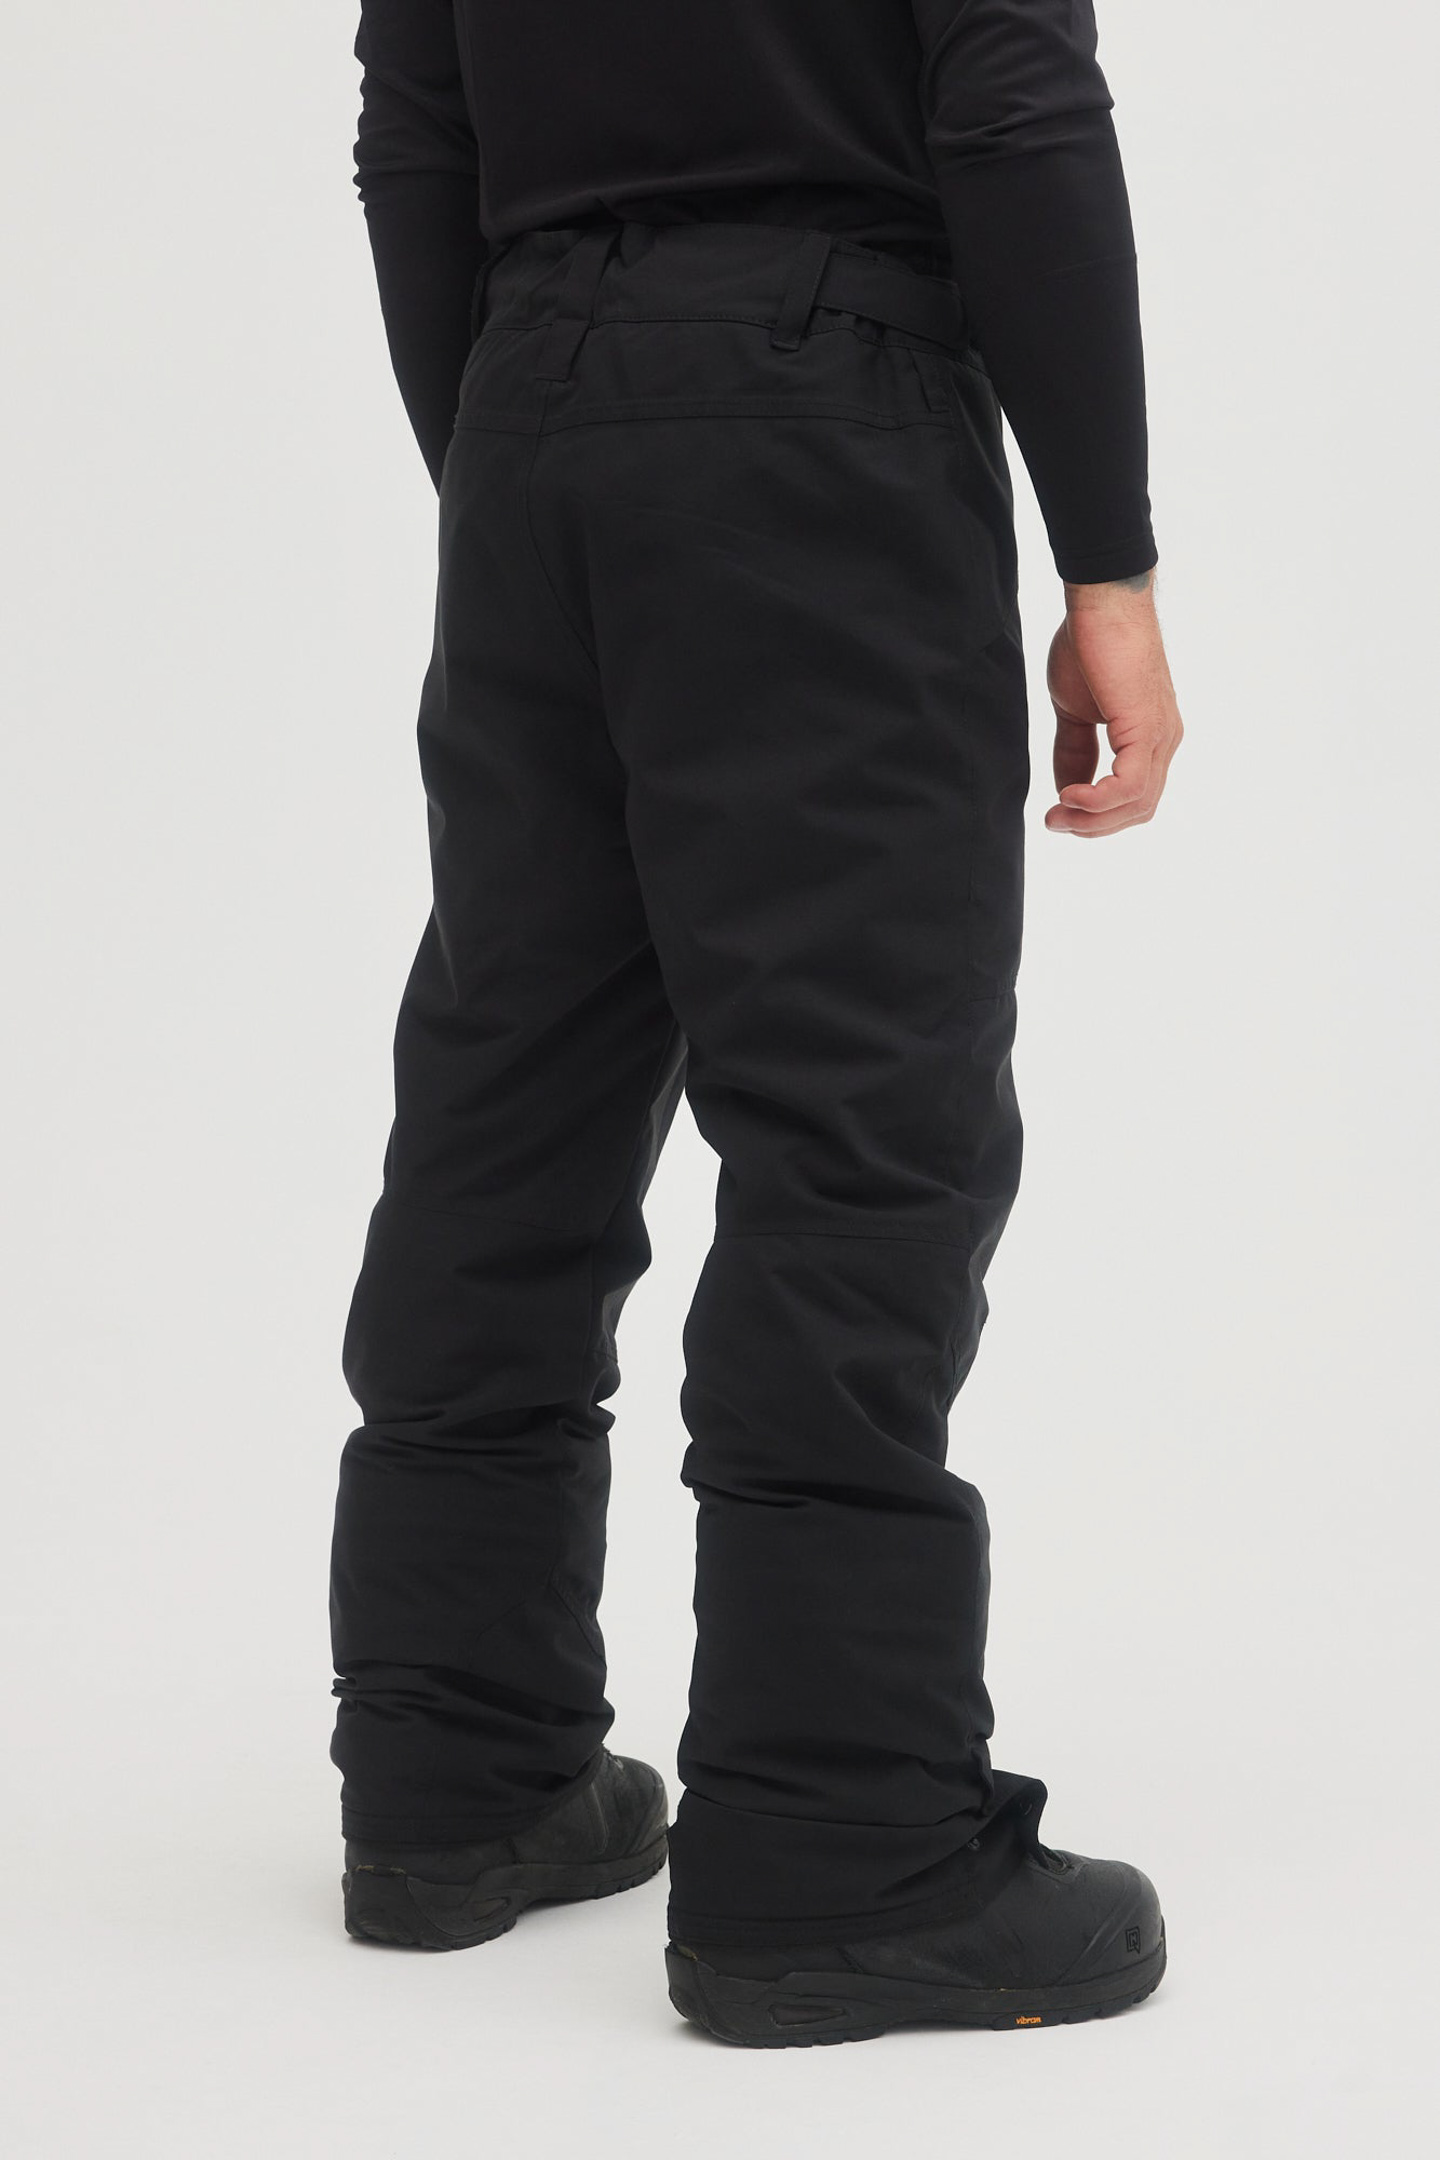 Black | O\'Neill Insulated Pants - Hammer Out